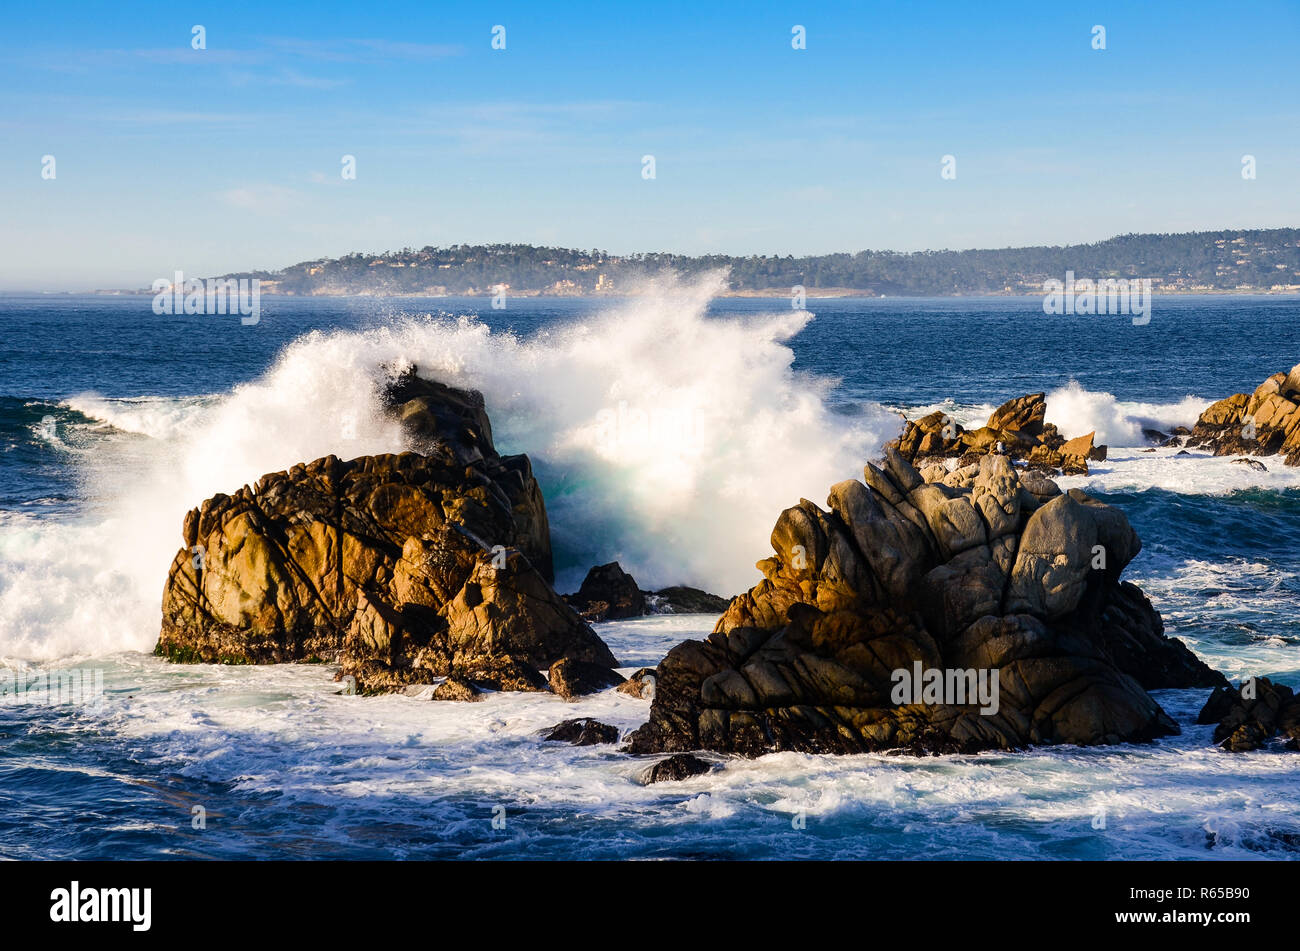 Surf breaks on rocks at Point Lobos overlooking Carmel Bay and the Monterey Peninsula on California's central coast Stock Photo